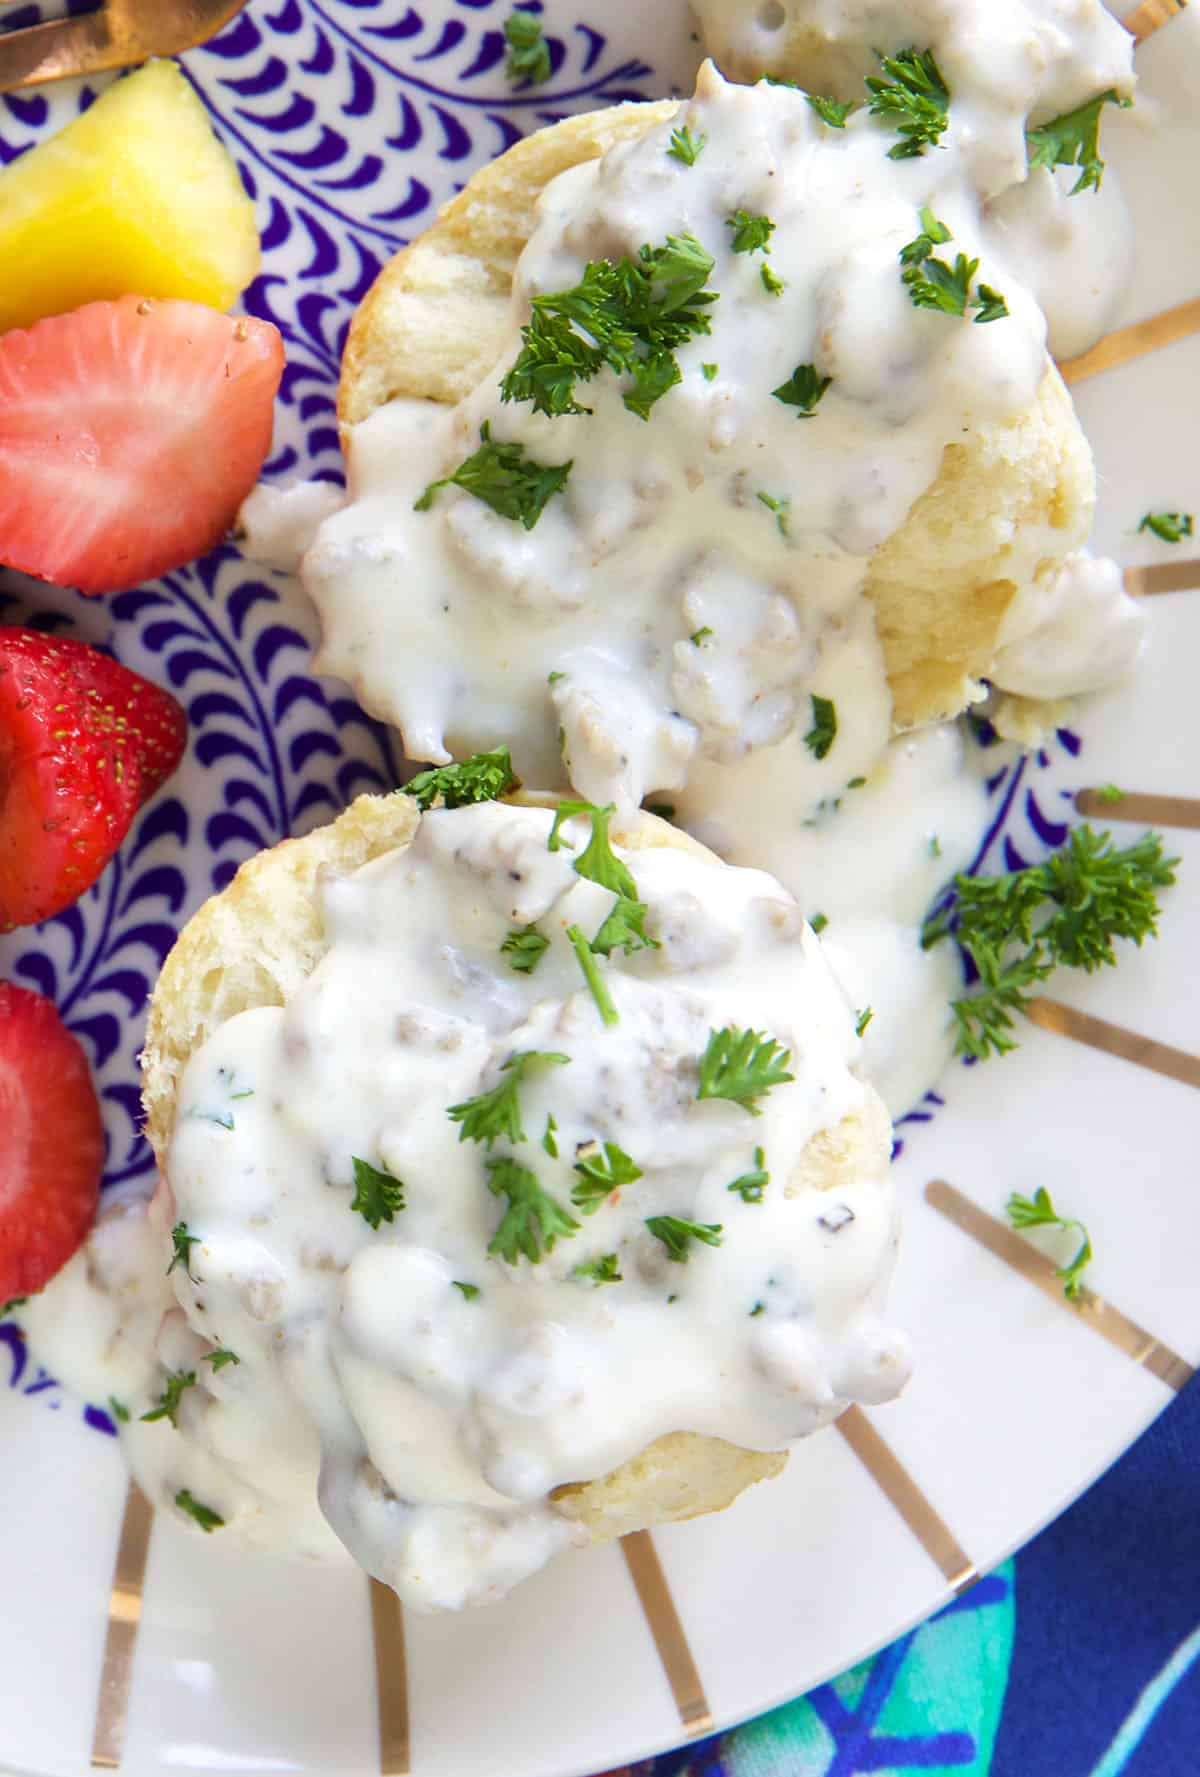 Sausage gravy and fresh parlsey are placed on top of biscuits.